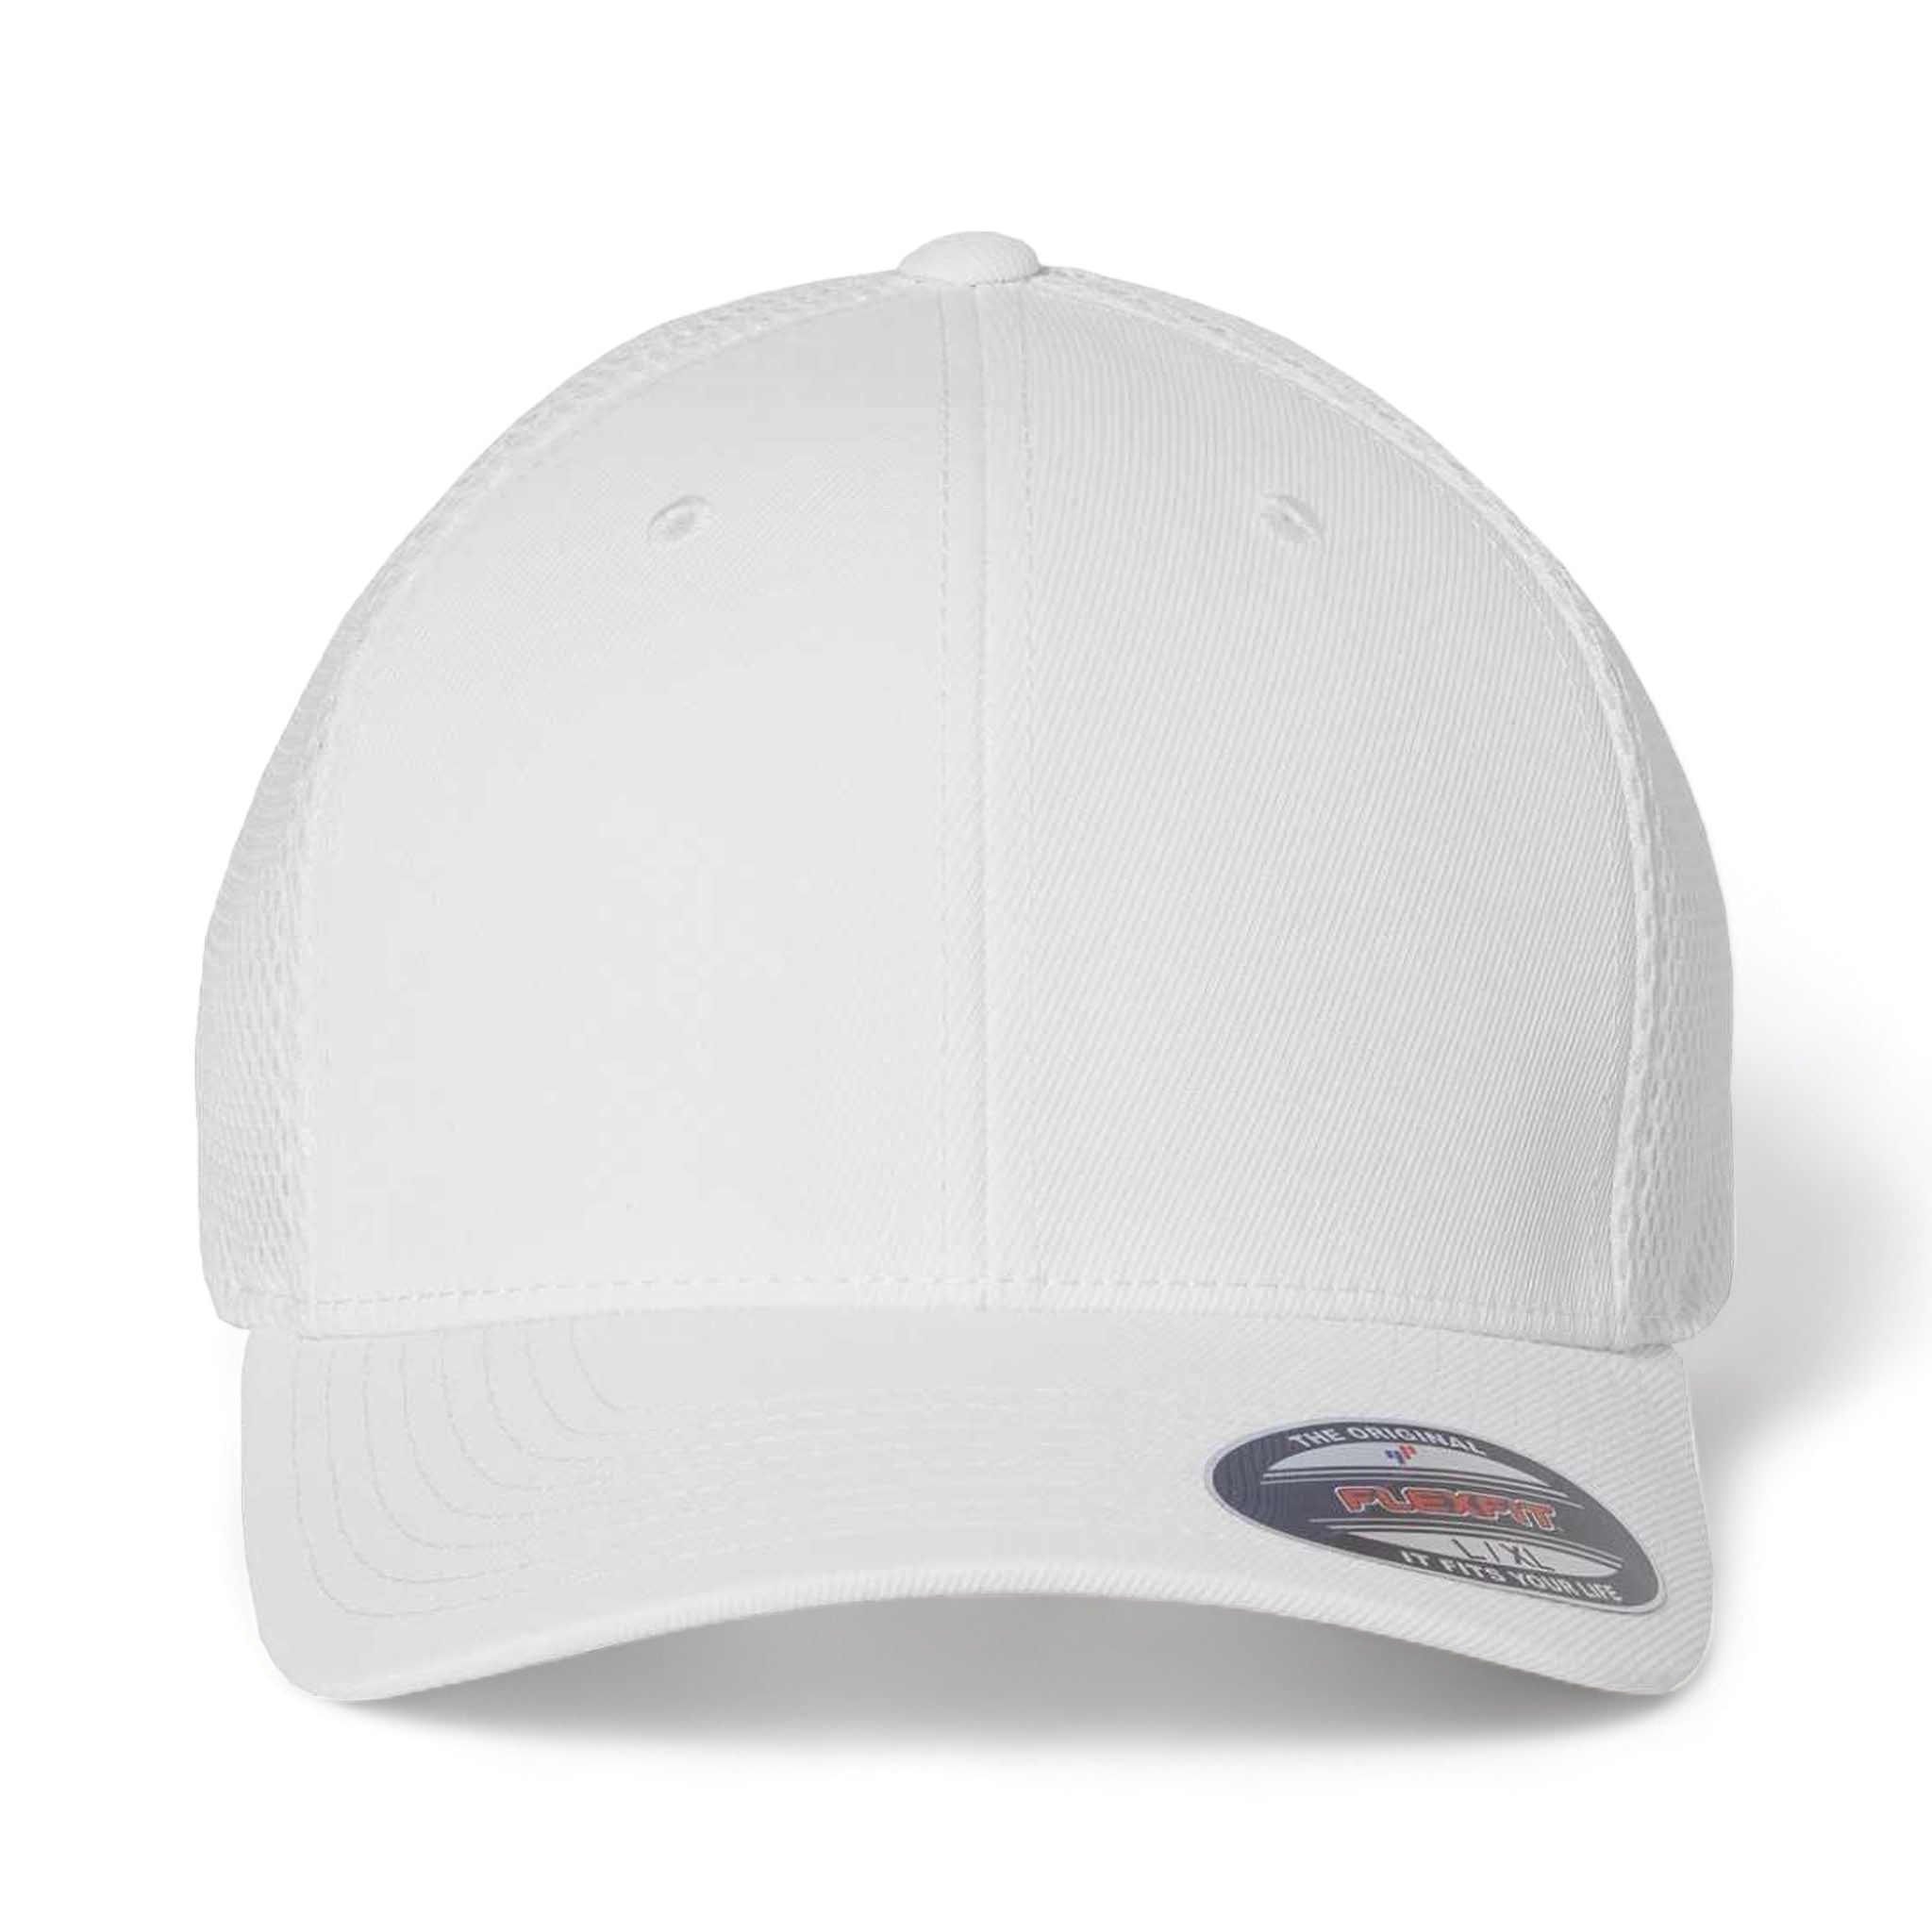 Front view of Flexfit 6533 custom hat in white